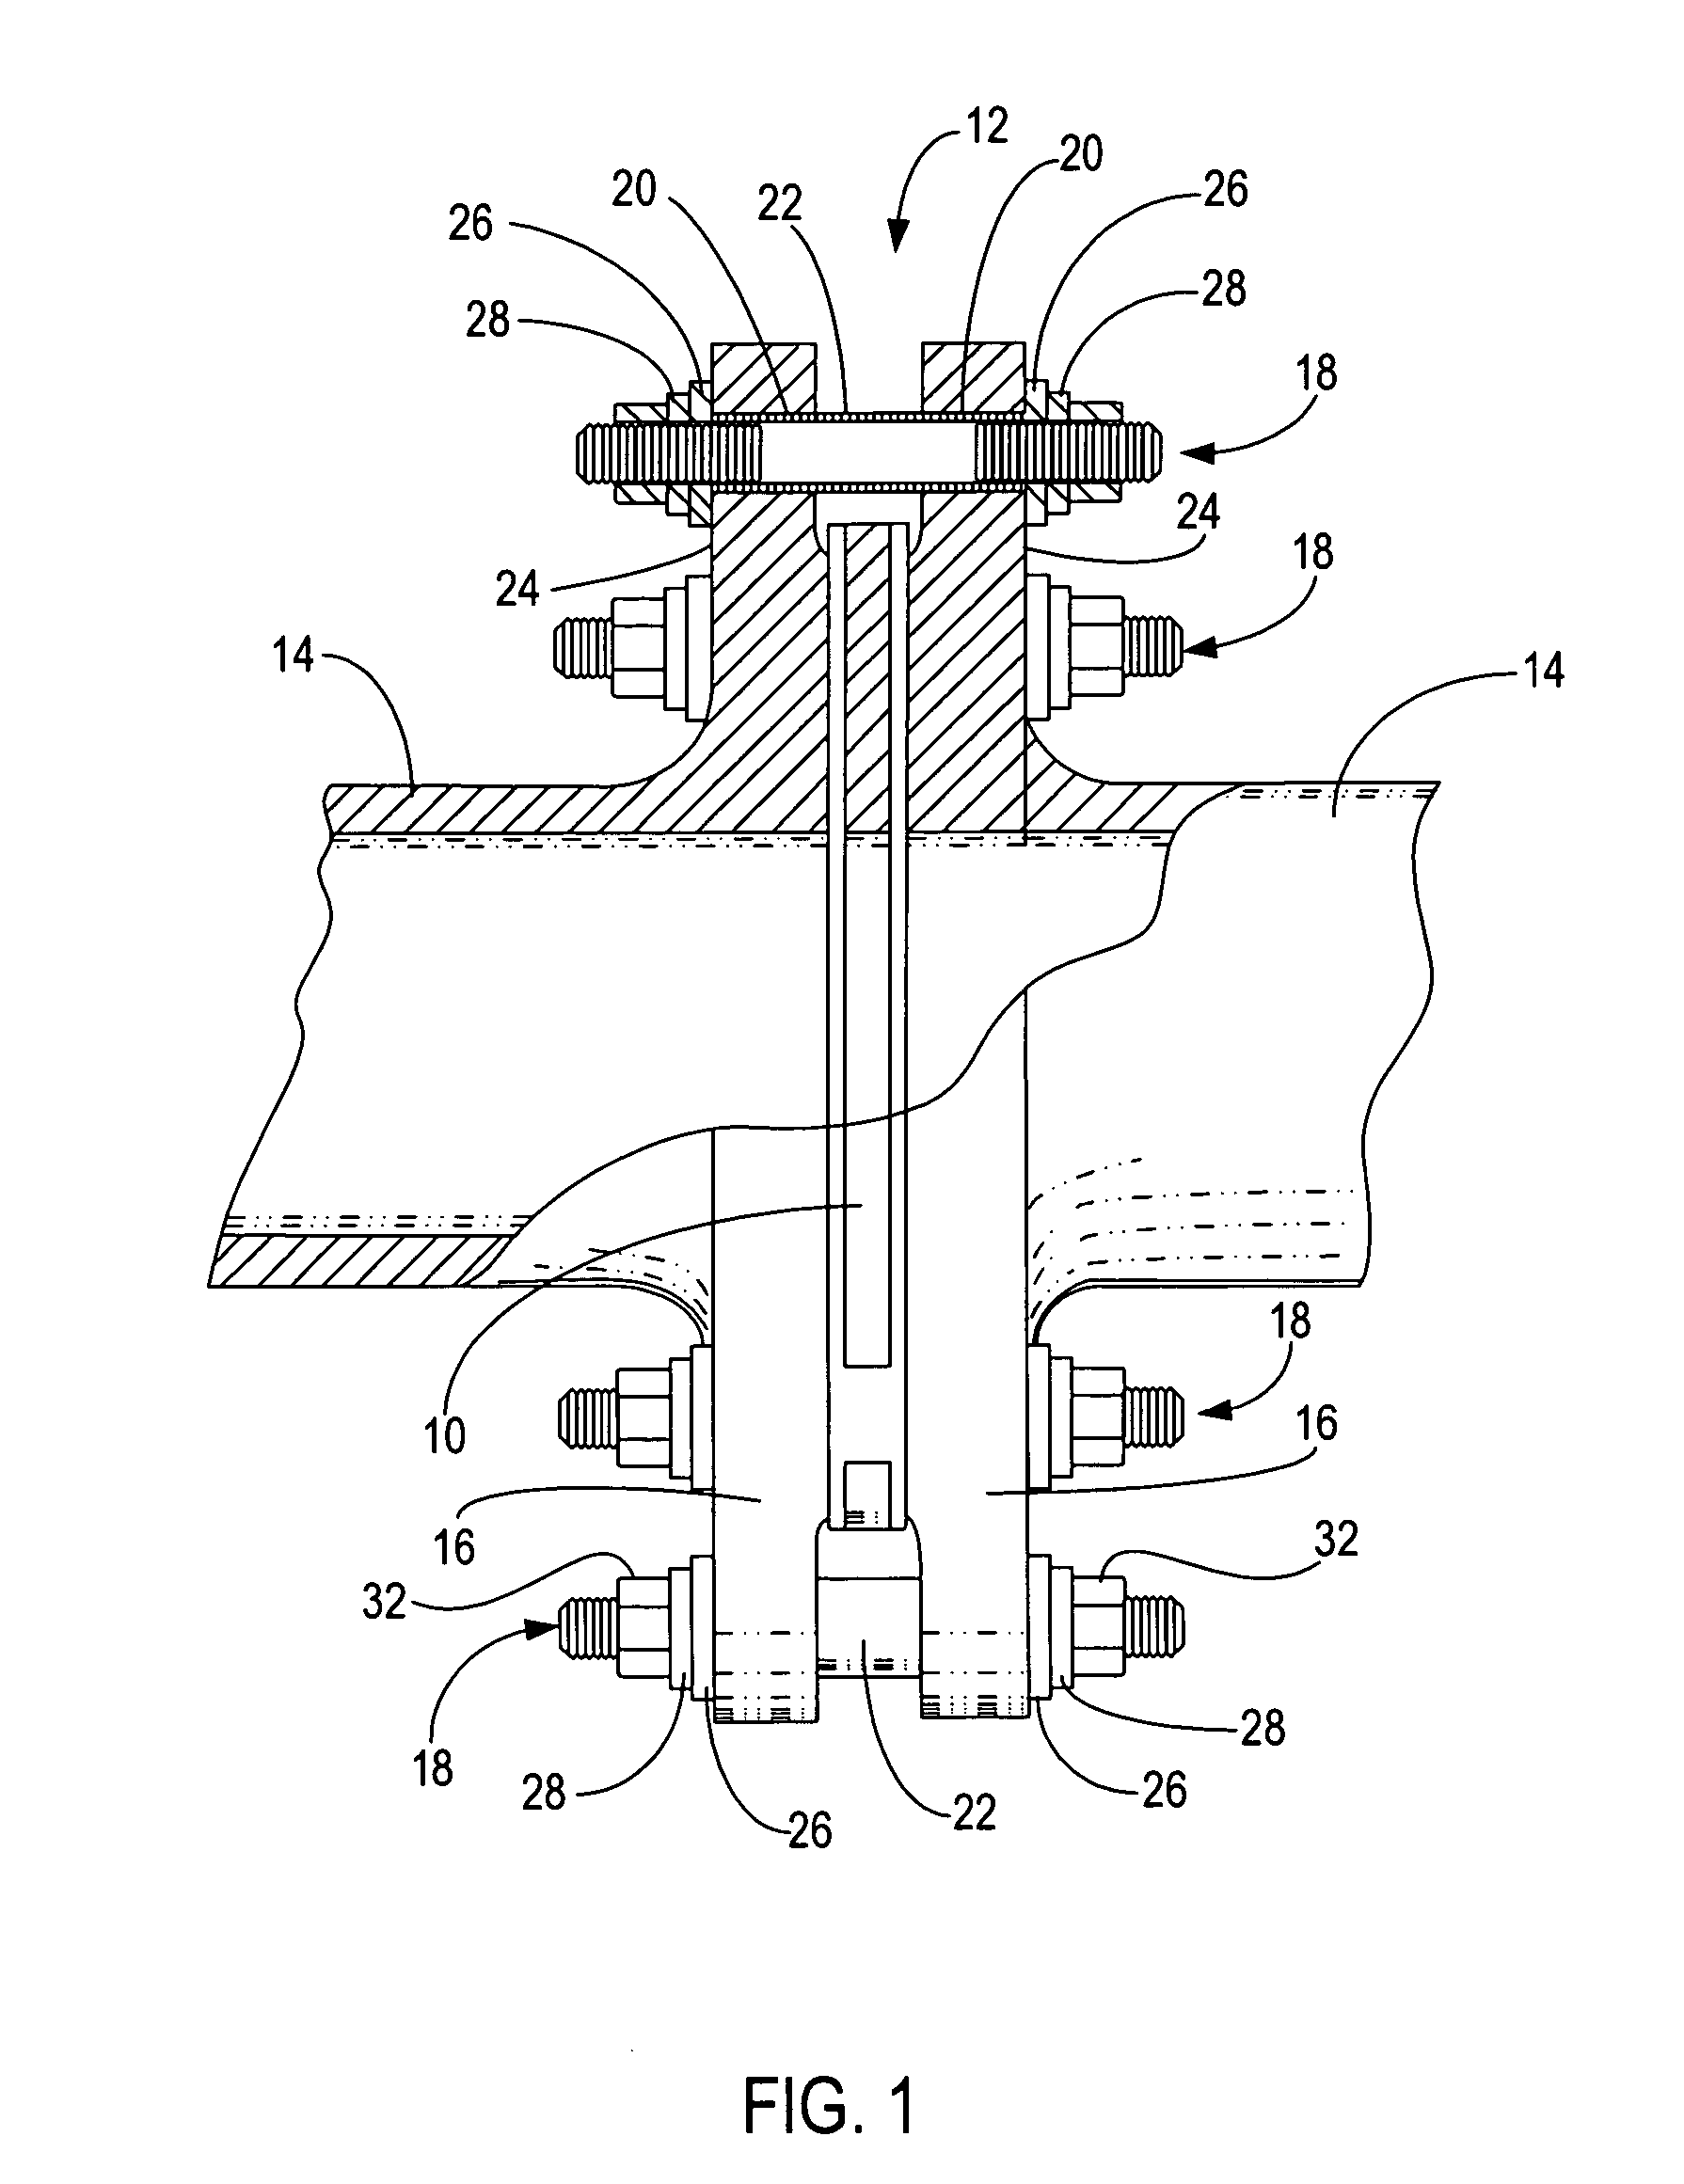 Isolation gasket, system and method of manufacture